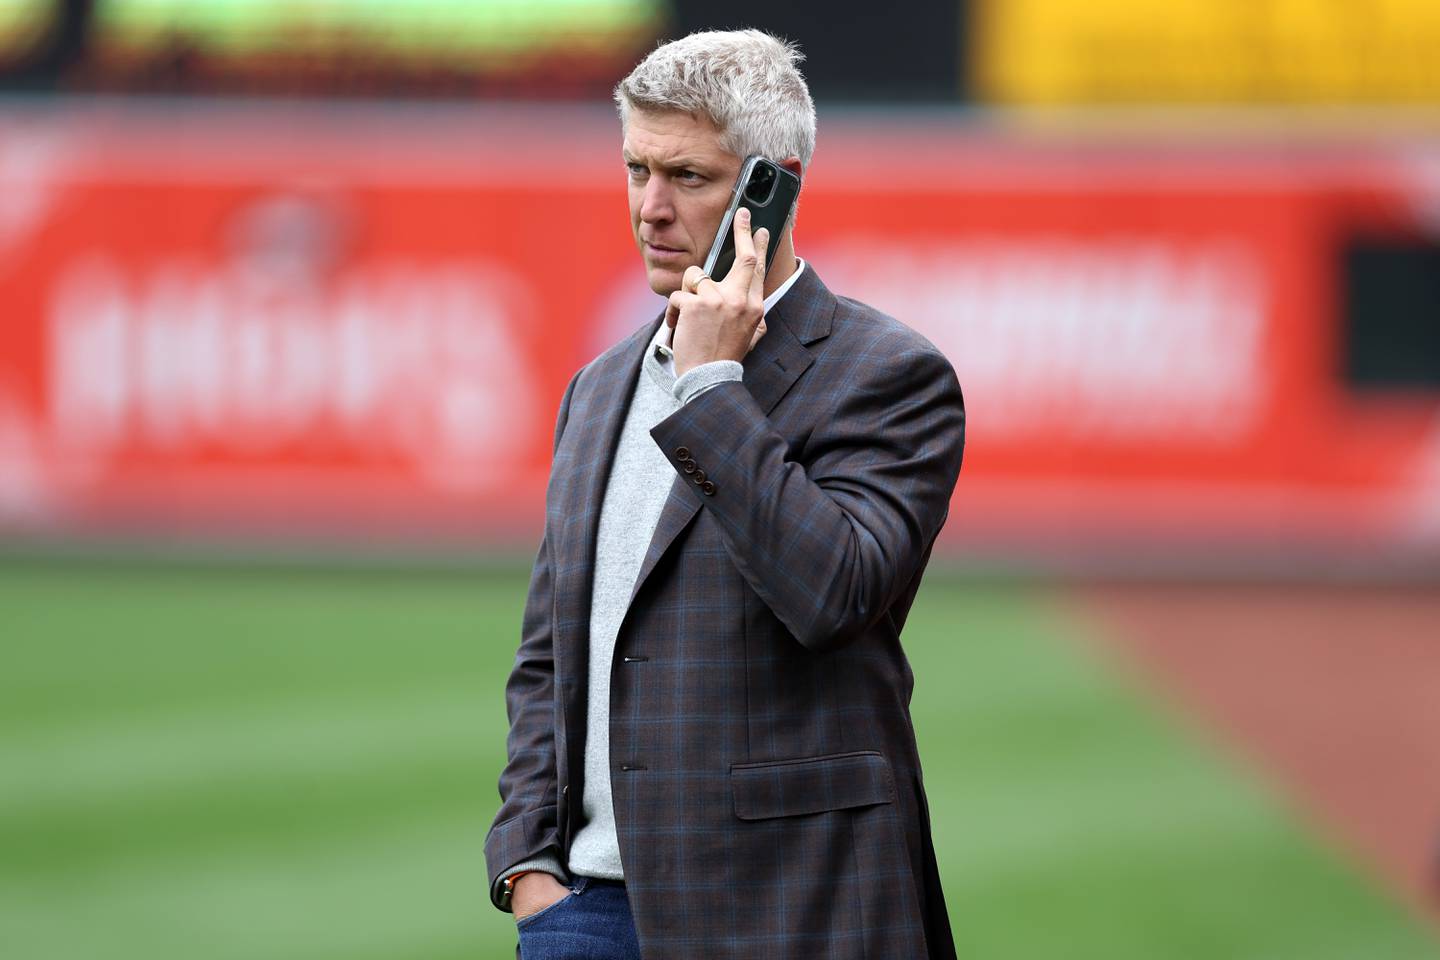 Baltimore Orioles general manager Mike Elias talks on the phone before the start of the Orioles and New York Yankees game at Oriole Park at Camden Yards on April 08, 2023 in Baltimore, Maryland.